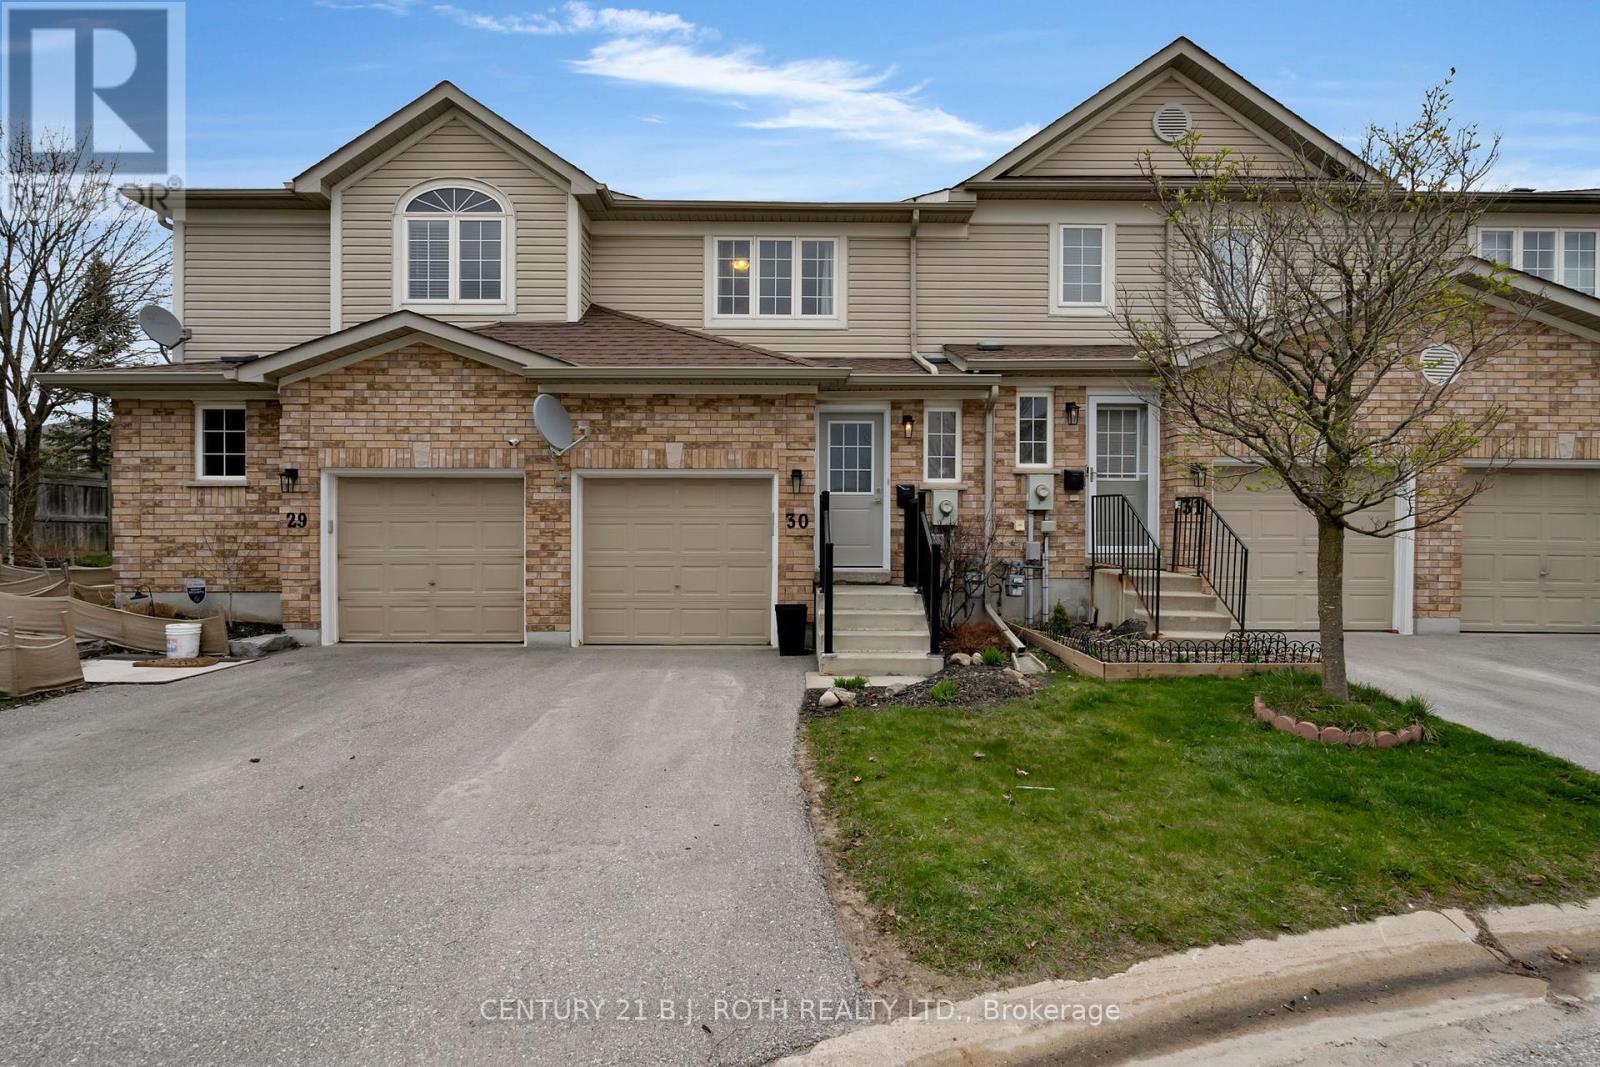 30 - 430 Mapleview Drive E, Barrie, Ontario  L4N 0R9 - Photo 1 - S8272368